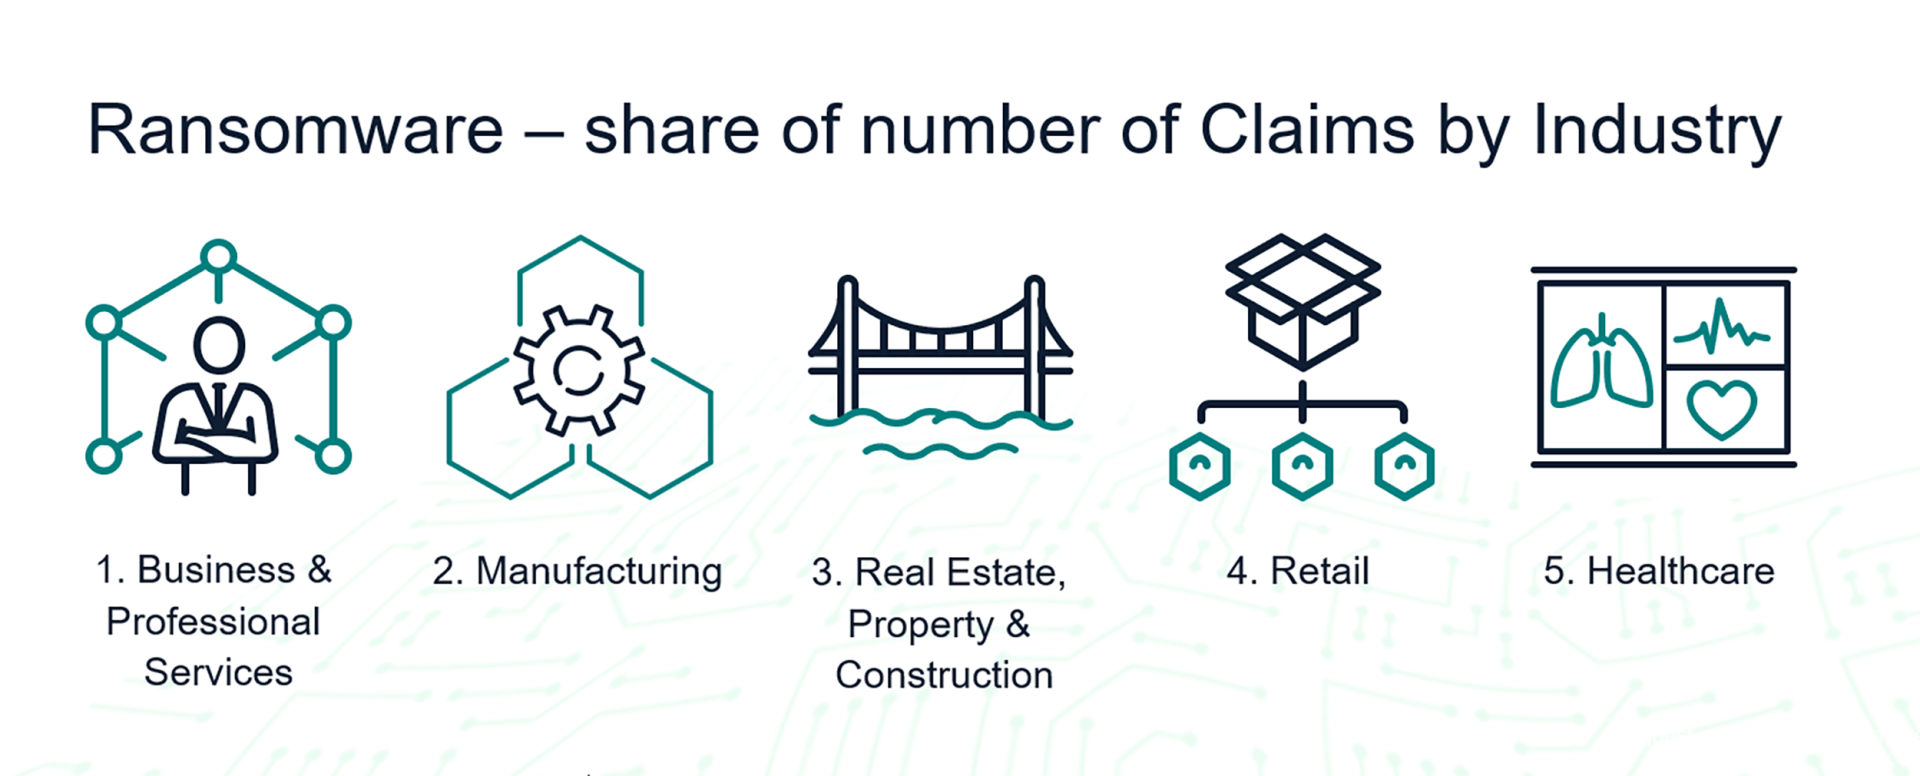 Ransomware - share of number of claims by industry